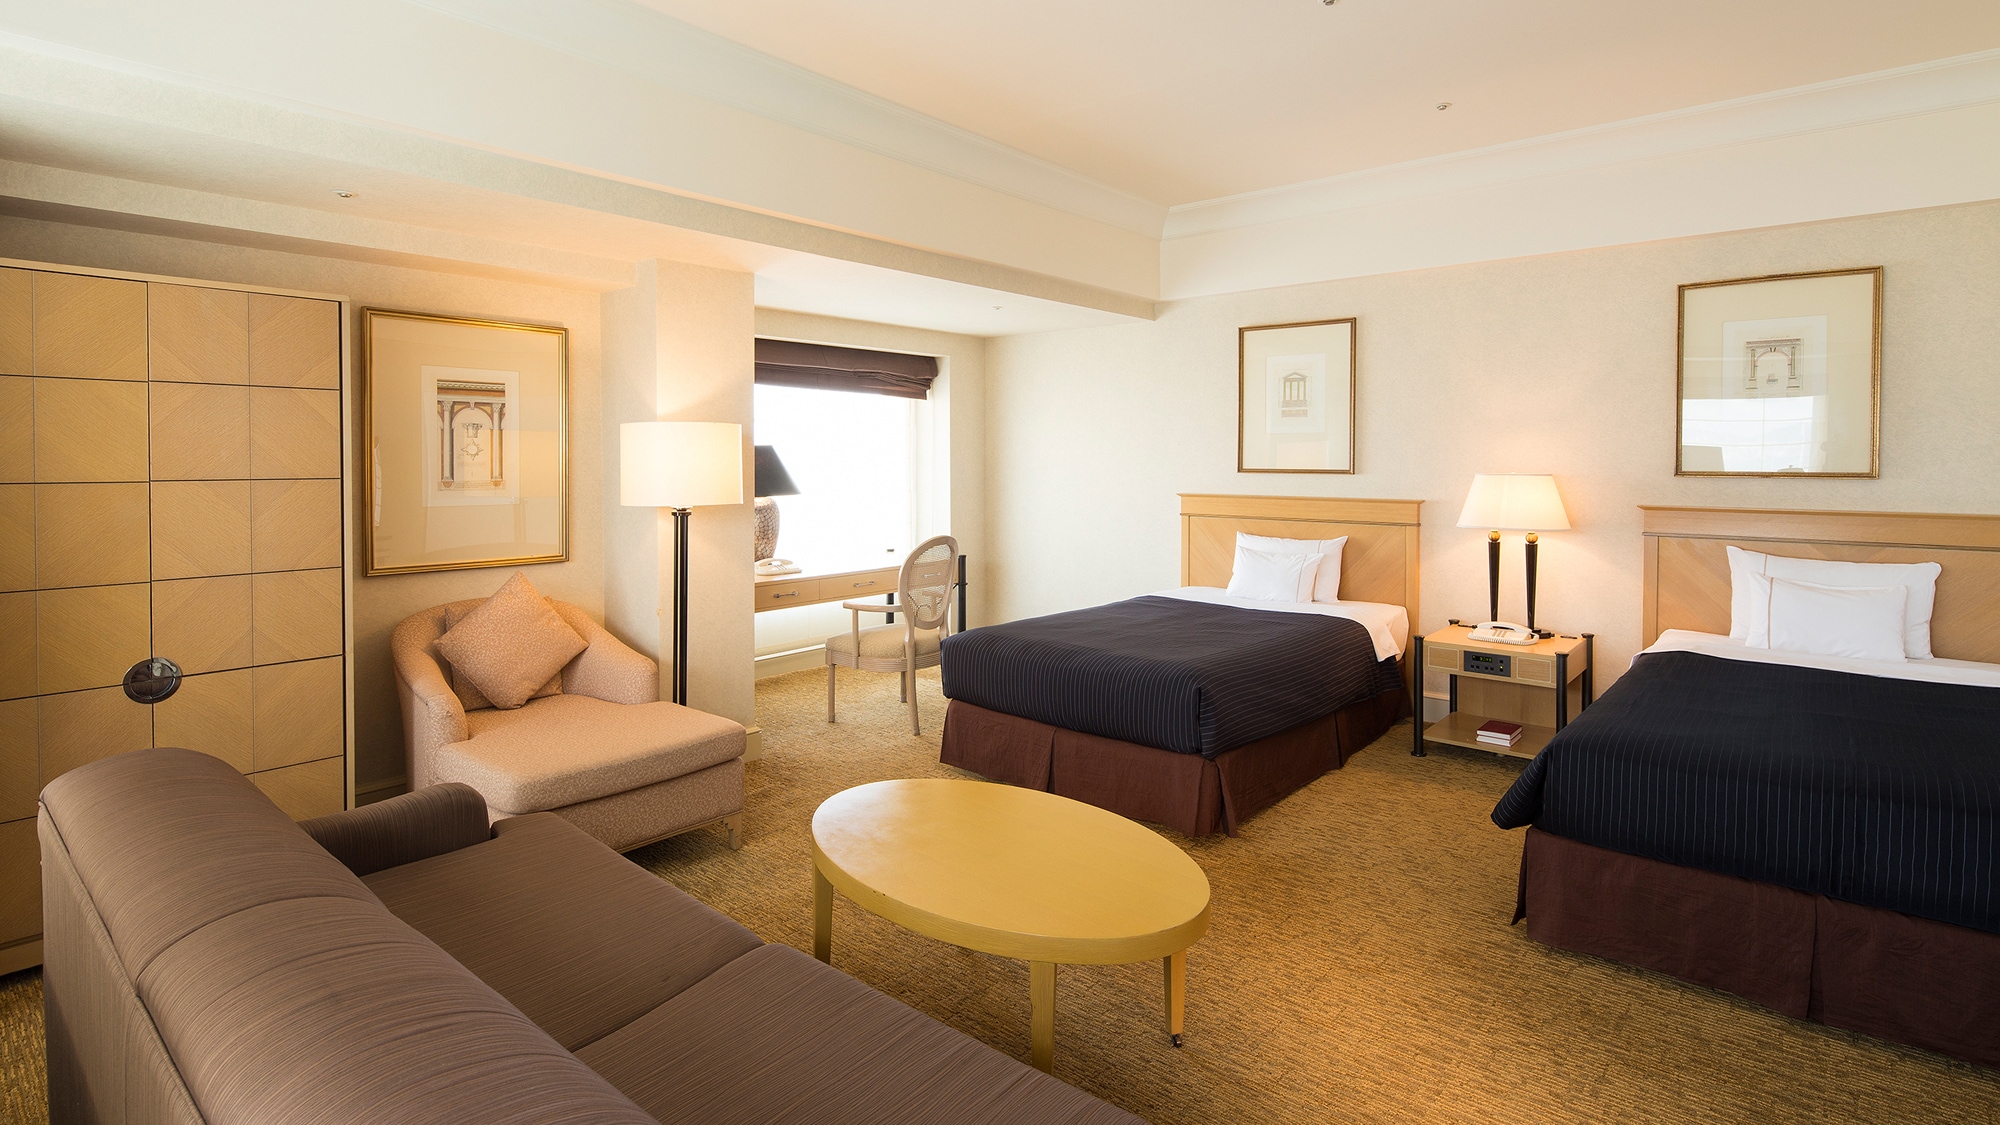 Hotel information and reservations for Kobe Bay Sheraton Hotel